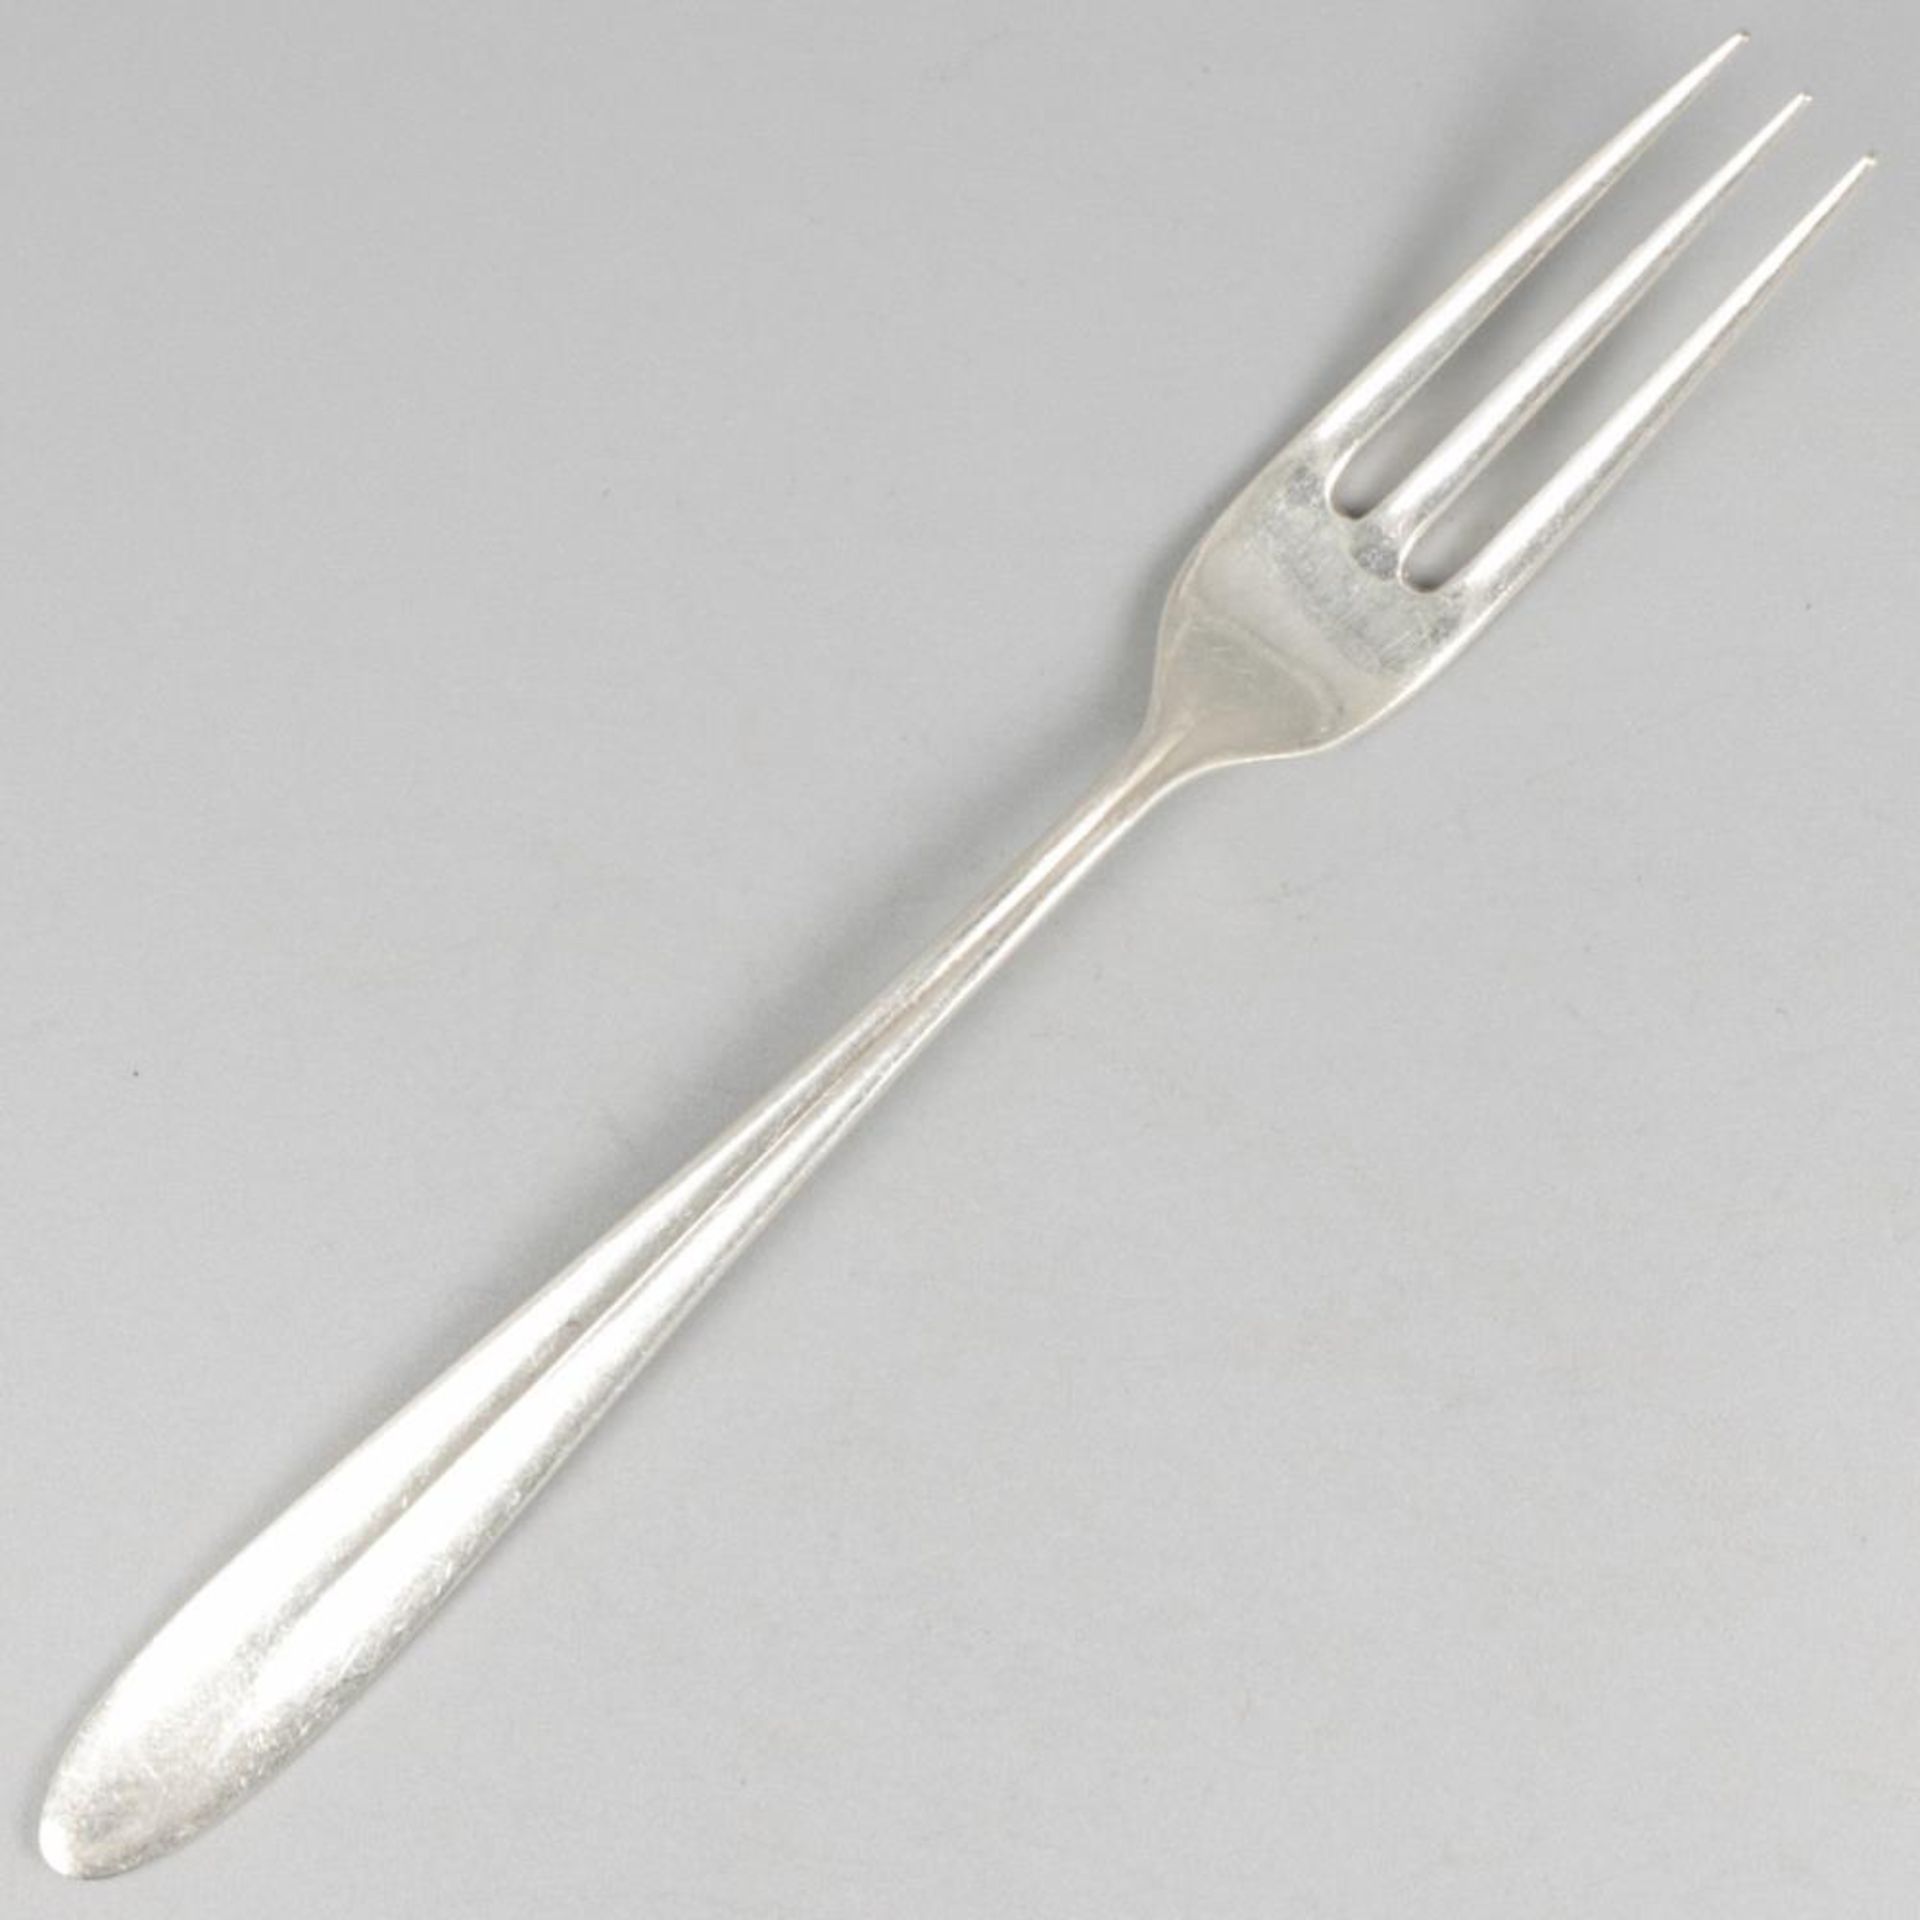 6-piece set of forks silver. - Image 3 of 6